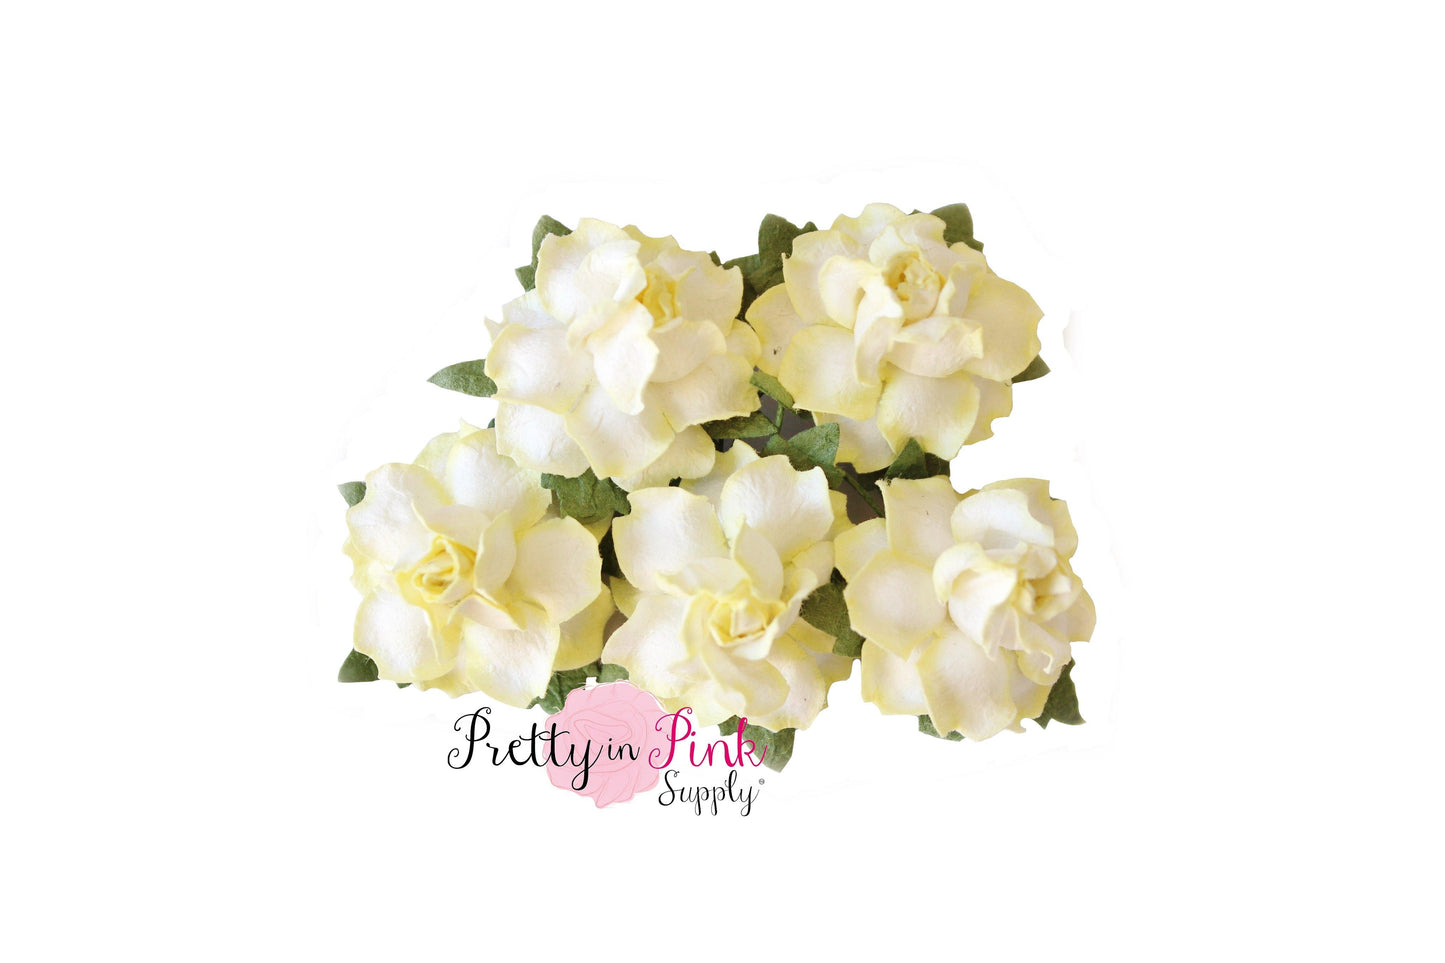 1" PREMIUM White with Pale Yellow Edges Paper Flowers - Pretty in Pink Supply